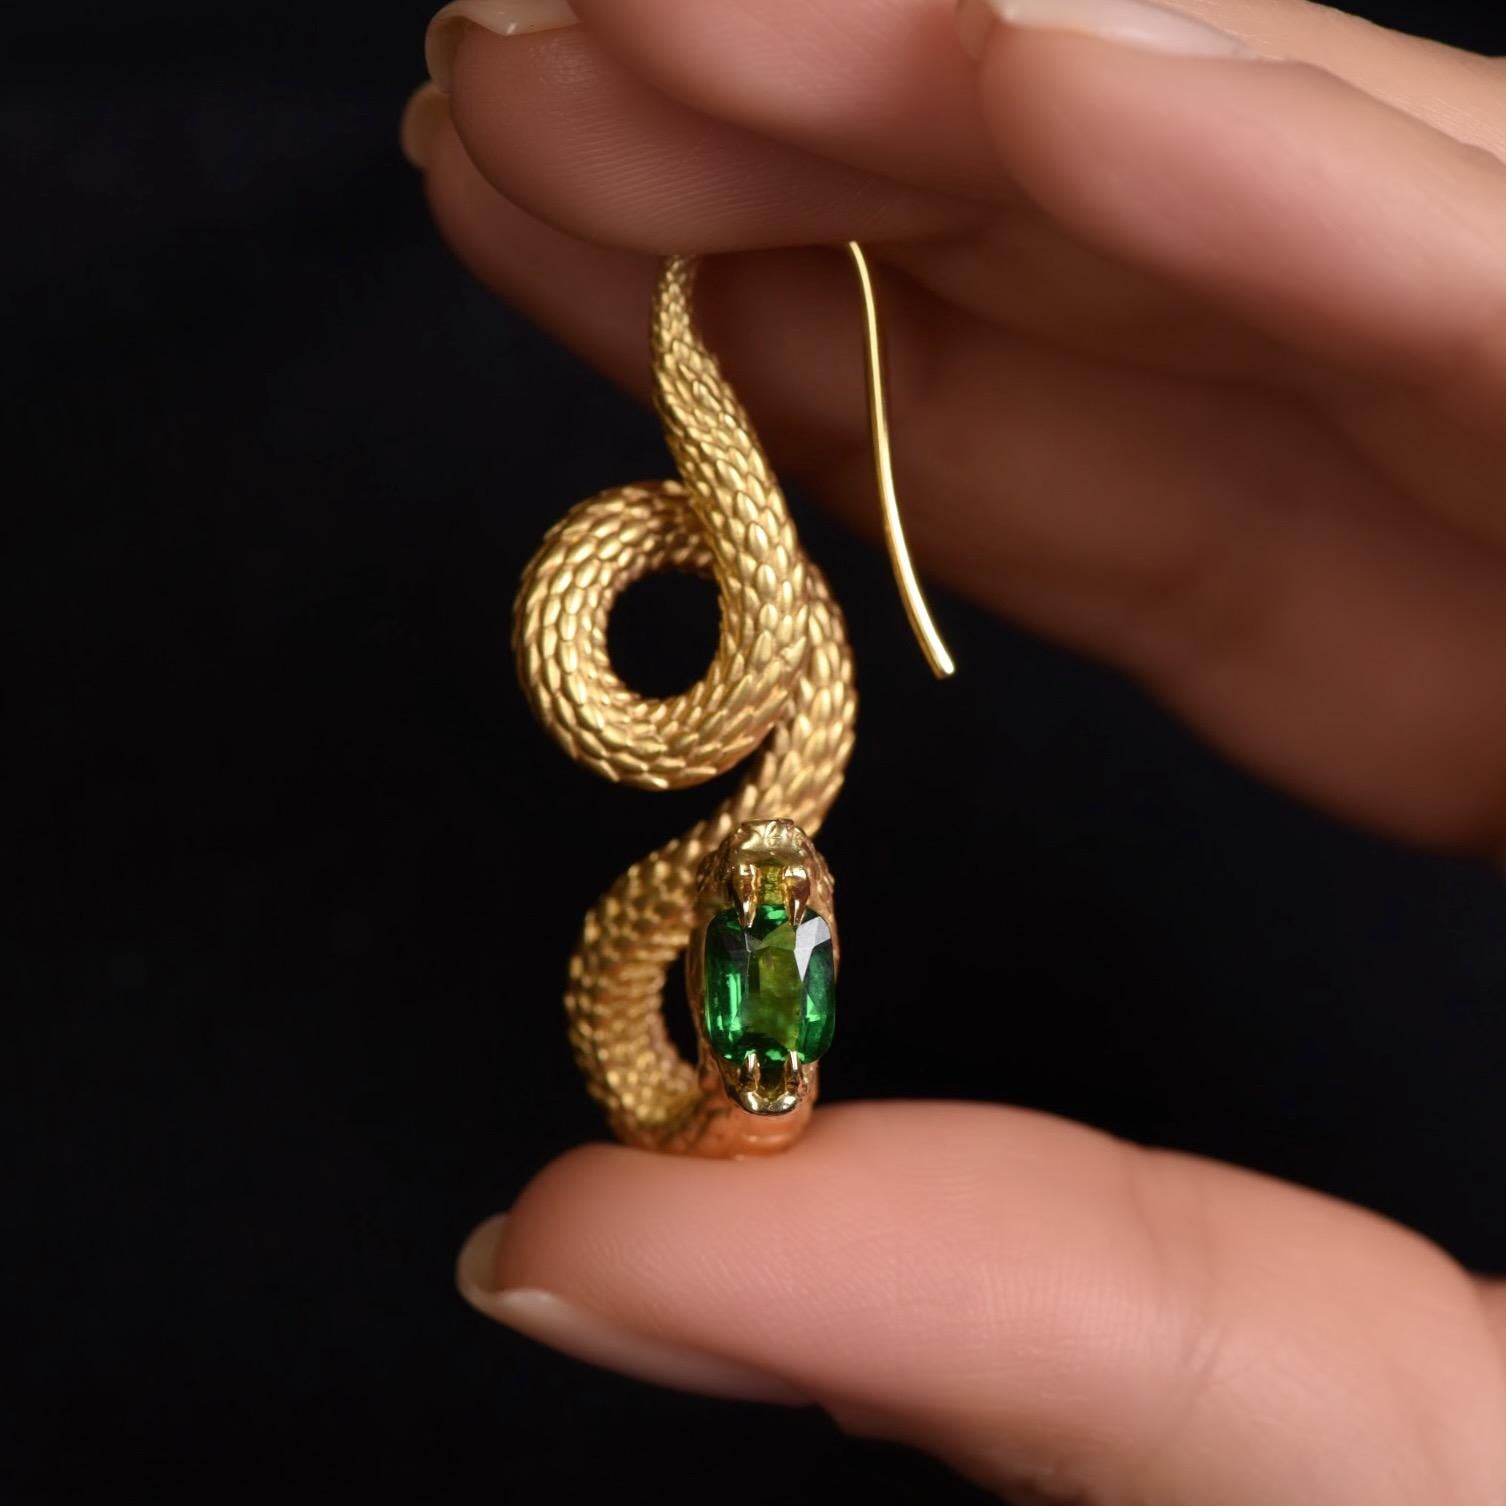 snakes and earrings